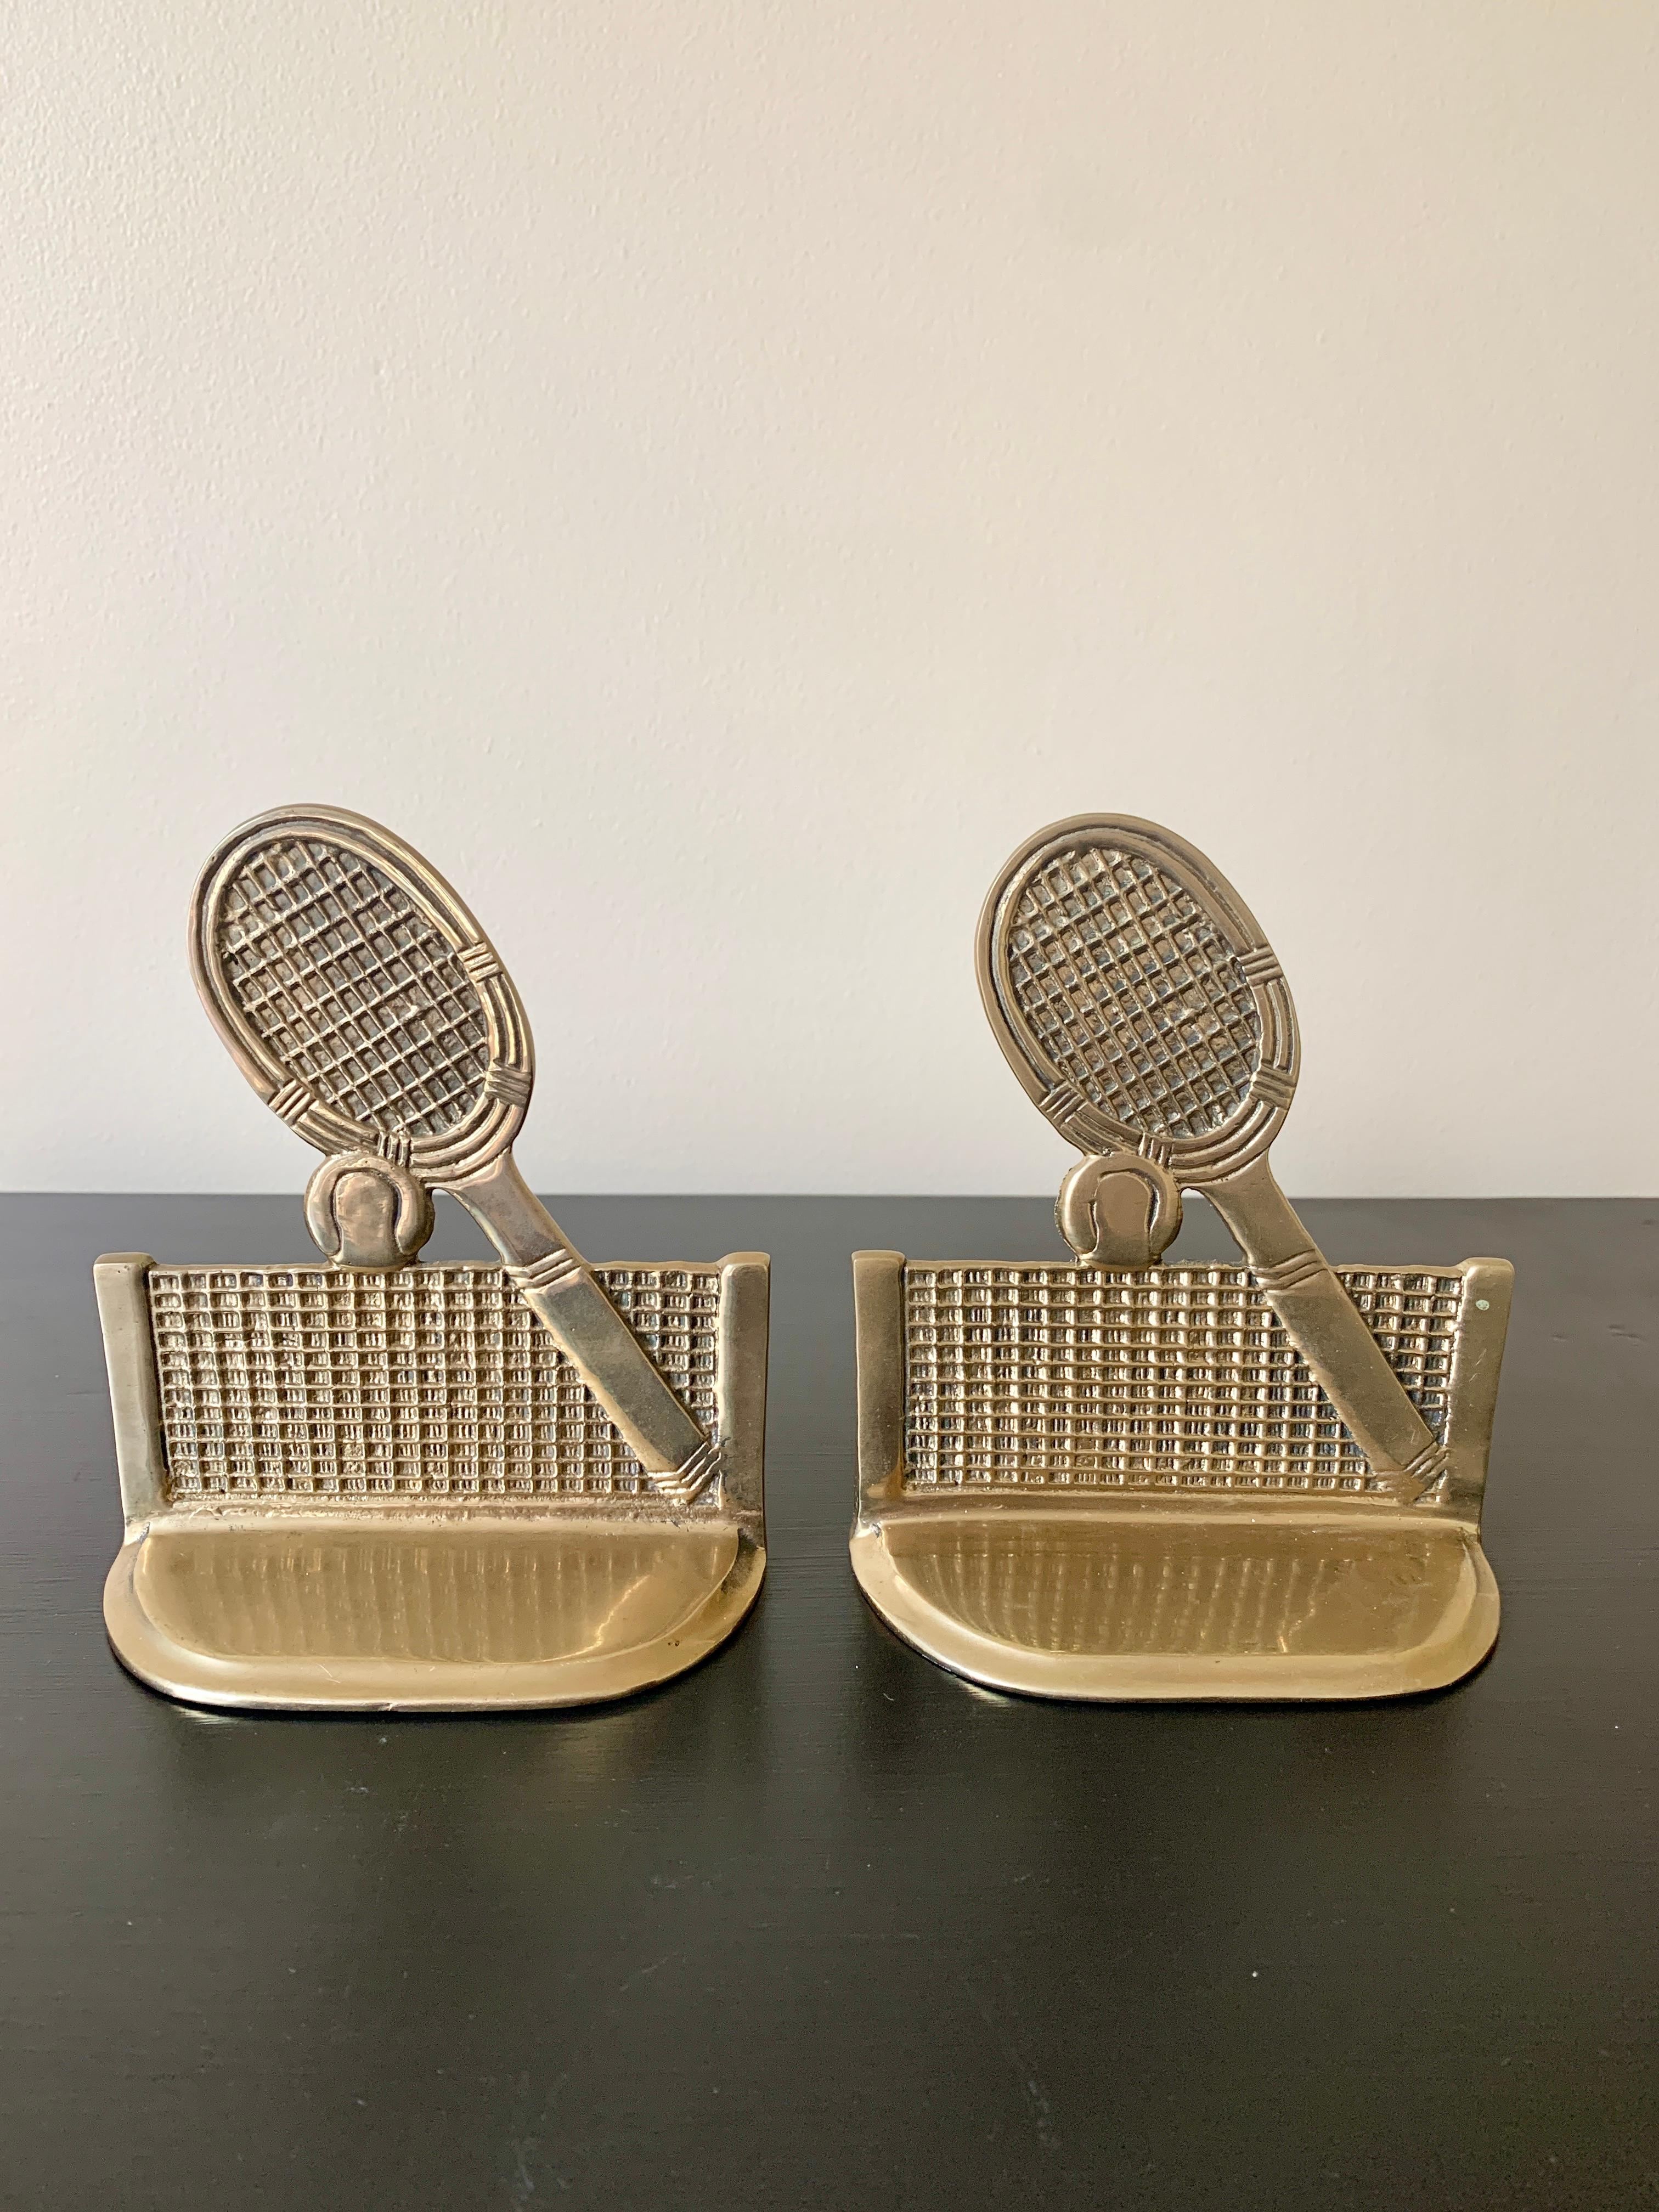 A beautiful pair of cast brass bookends in the form of tennis rackets, nets, and tennis balls.

USA, Mid-20th Century

Measures: 5.13